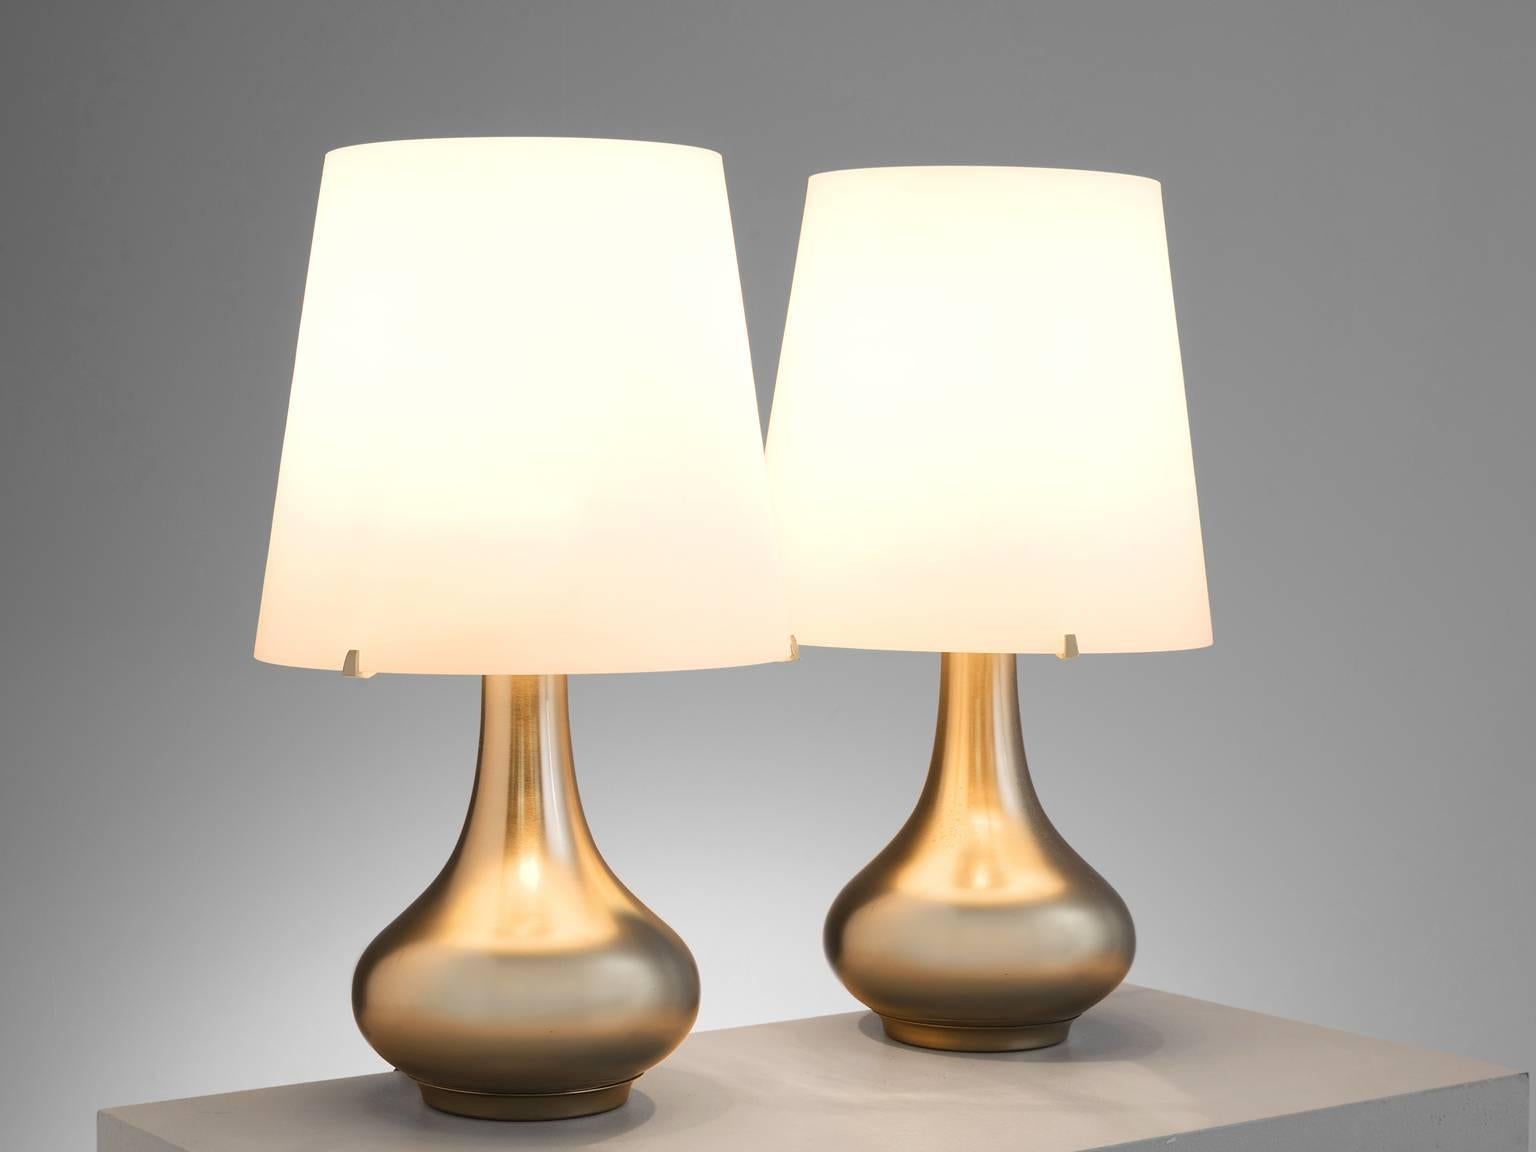 Max Ingrand for Fontana Arte Table Lamp, Model 2344, frosted glass, brushed nickel base, Italy, design 1964, production later

This set of classic lamps are made out of frosted glass shades that are mounted on a brushed nickel base. The base is